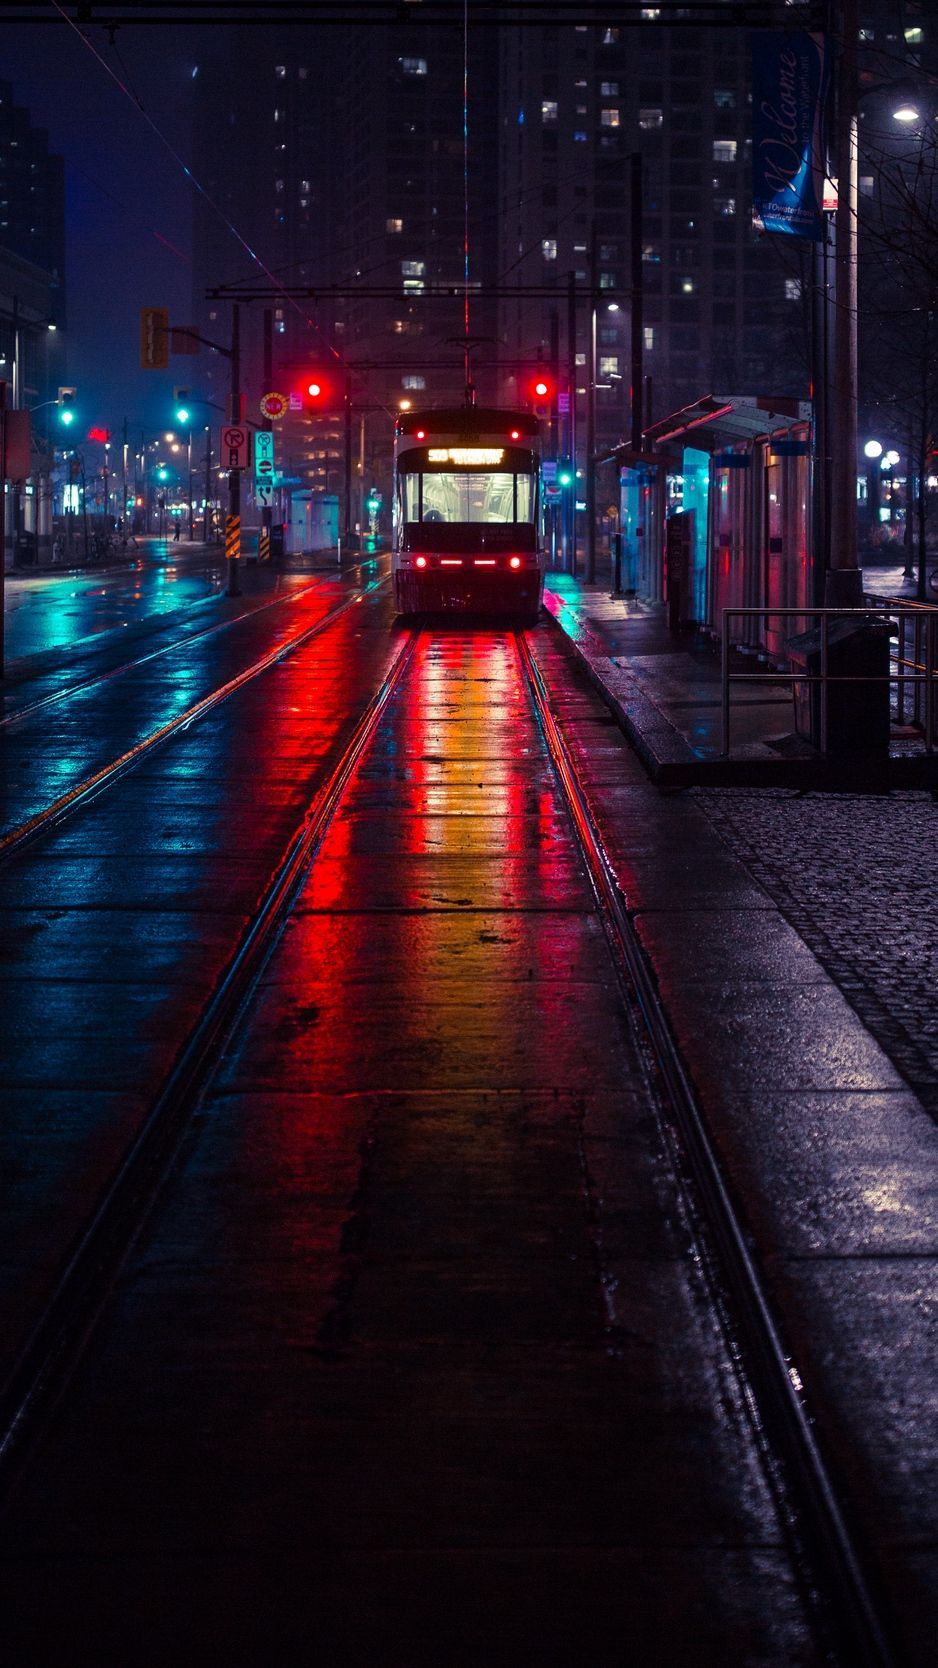 Name: iPhone X Wallpaper 4K Resolution: 938x1688 Category: Bus